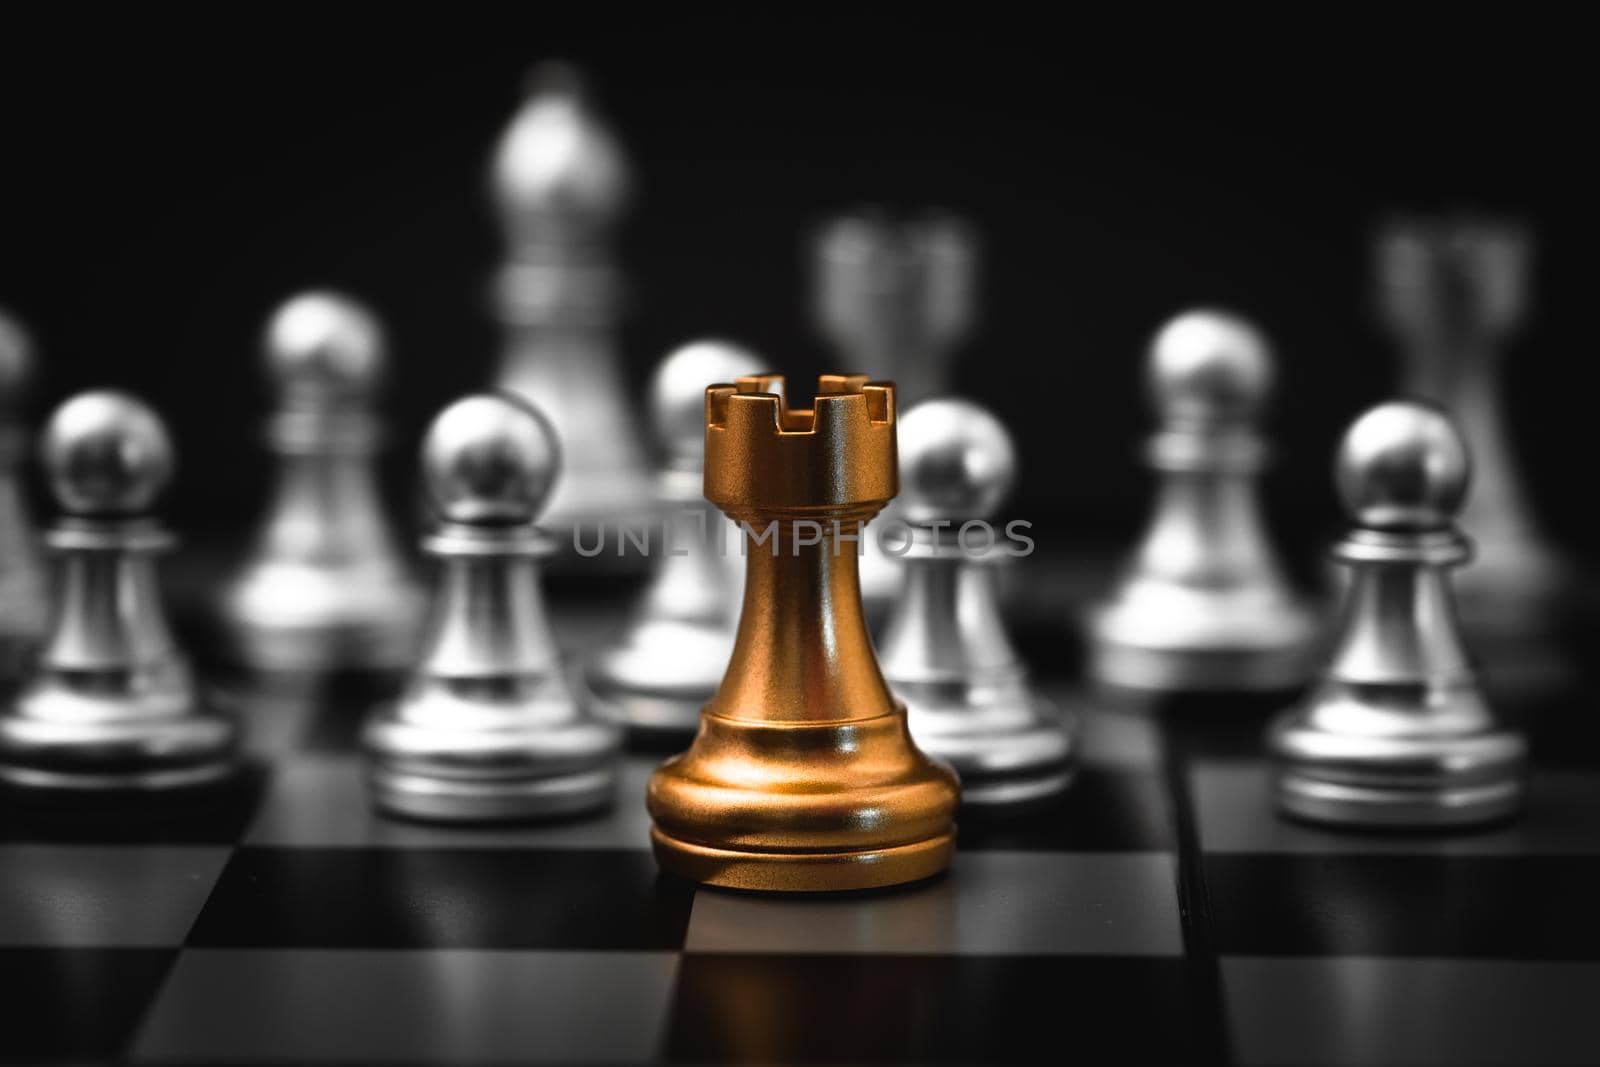 Gold Rook or Castle Tower Chess piece closeup on chess board game. Elite Company leader concept.